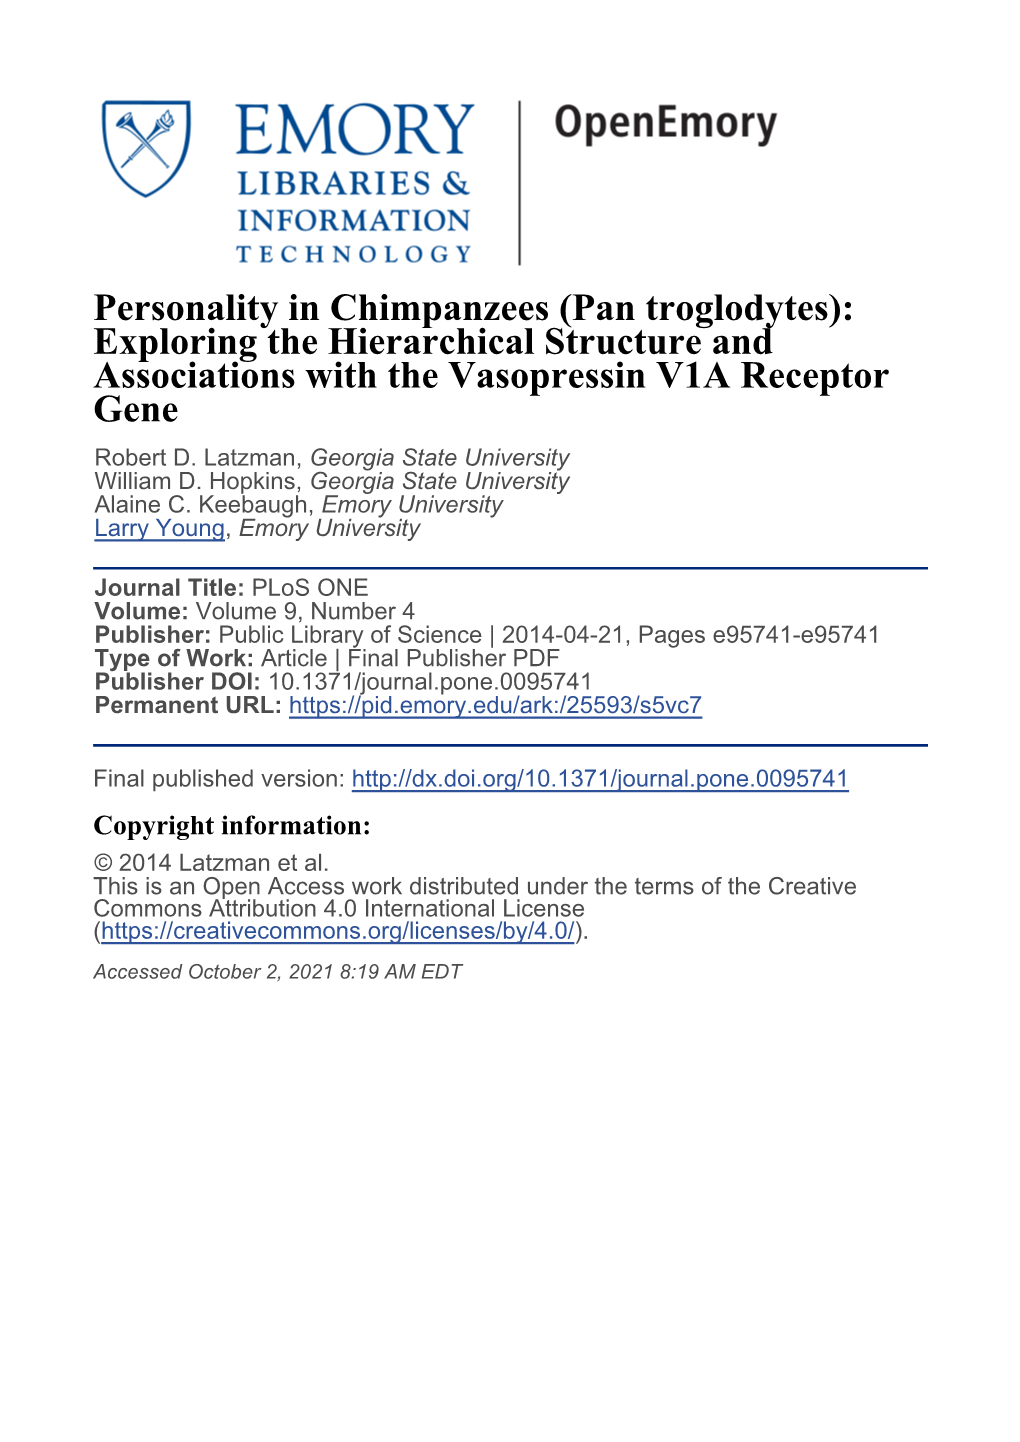 Personality in Chimpanzees (Pan Troglodytes): Exploring the Hierarchical Structure and Associations with the Vasopressin V1A Receptor Gene Robert D